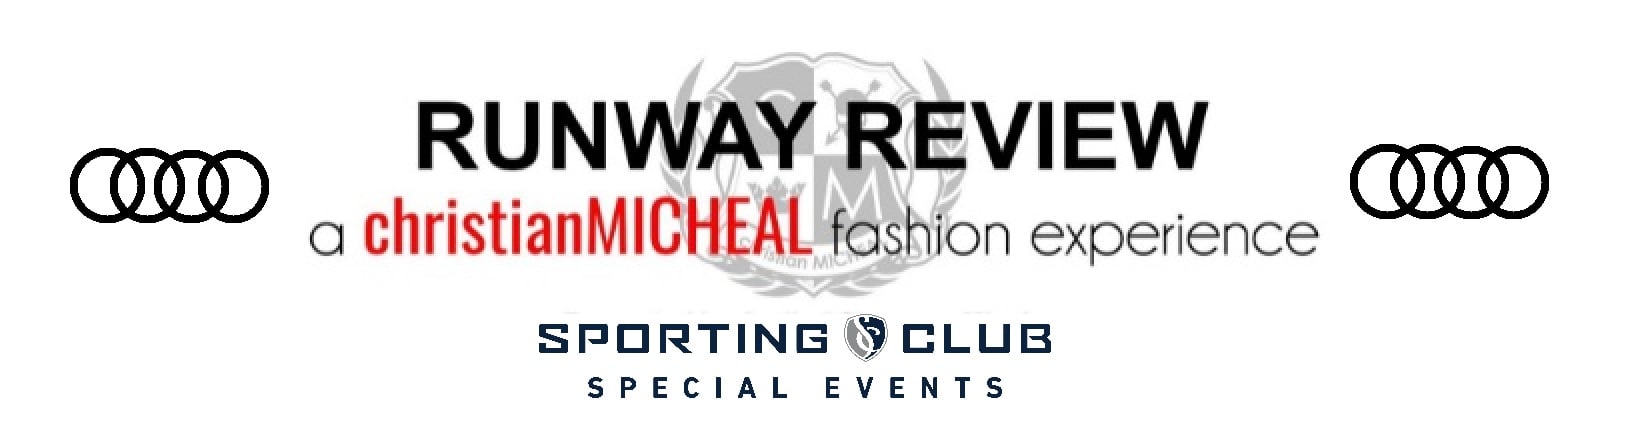 Runway Review KC | Tickets